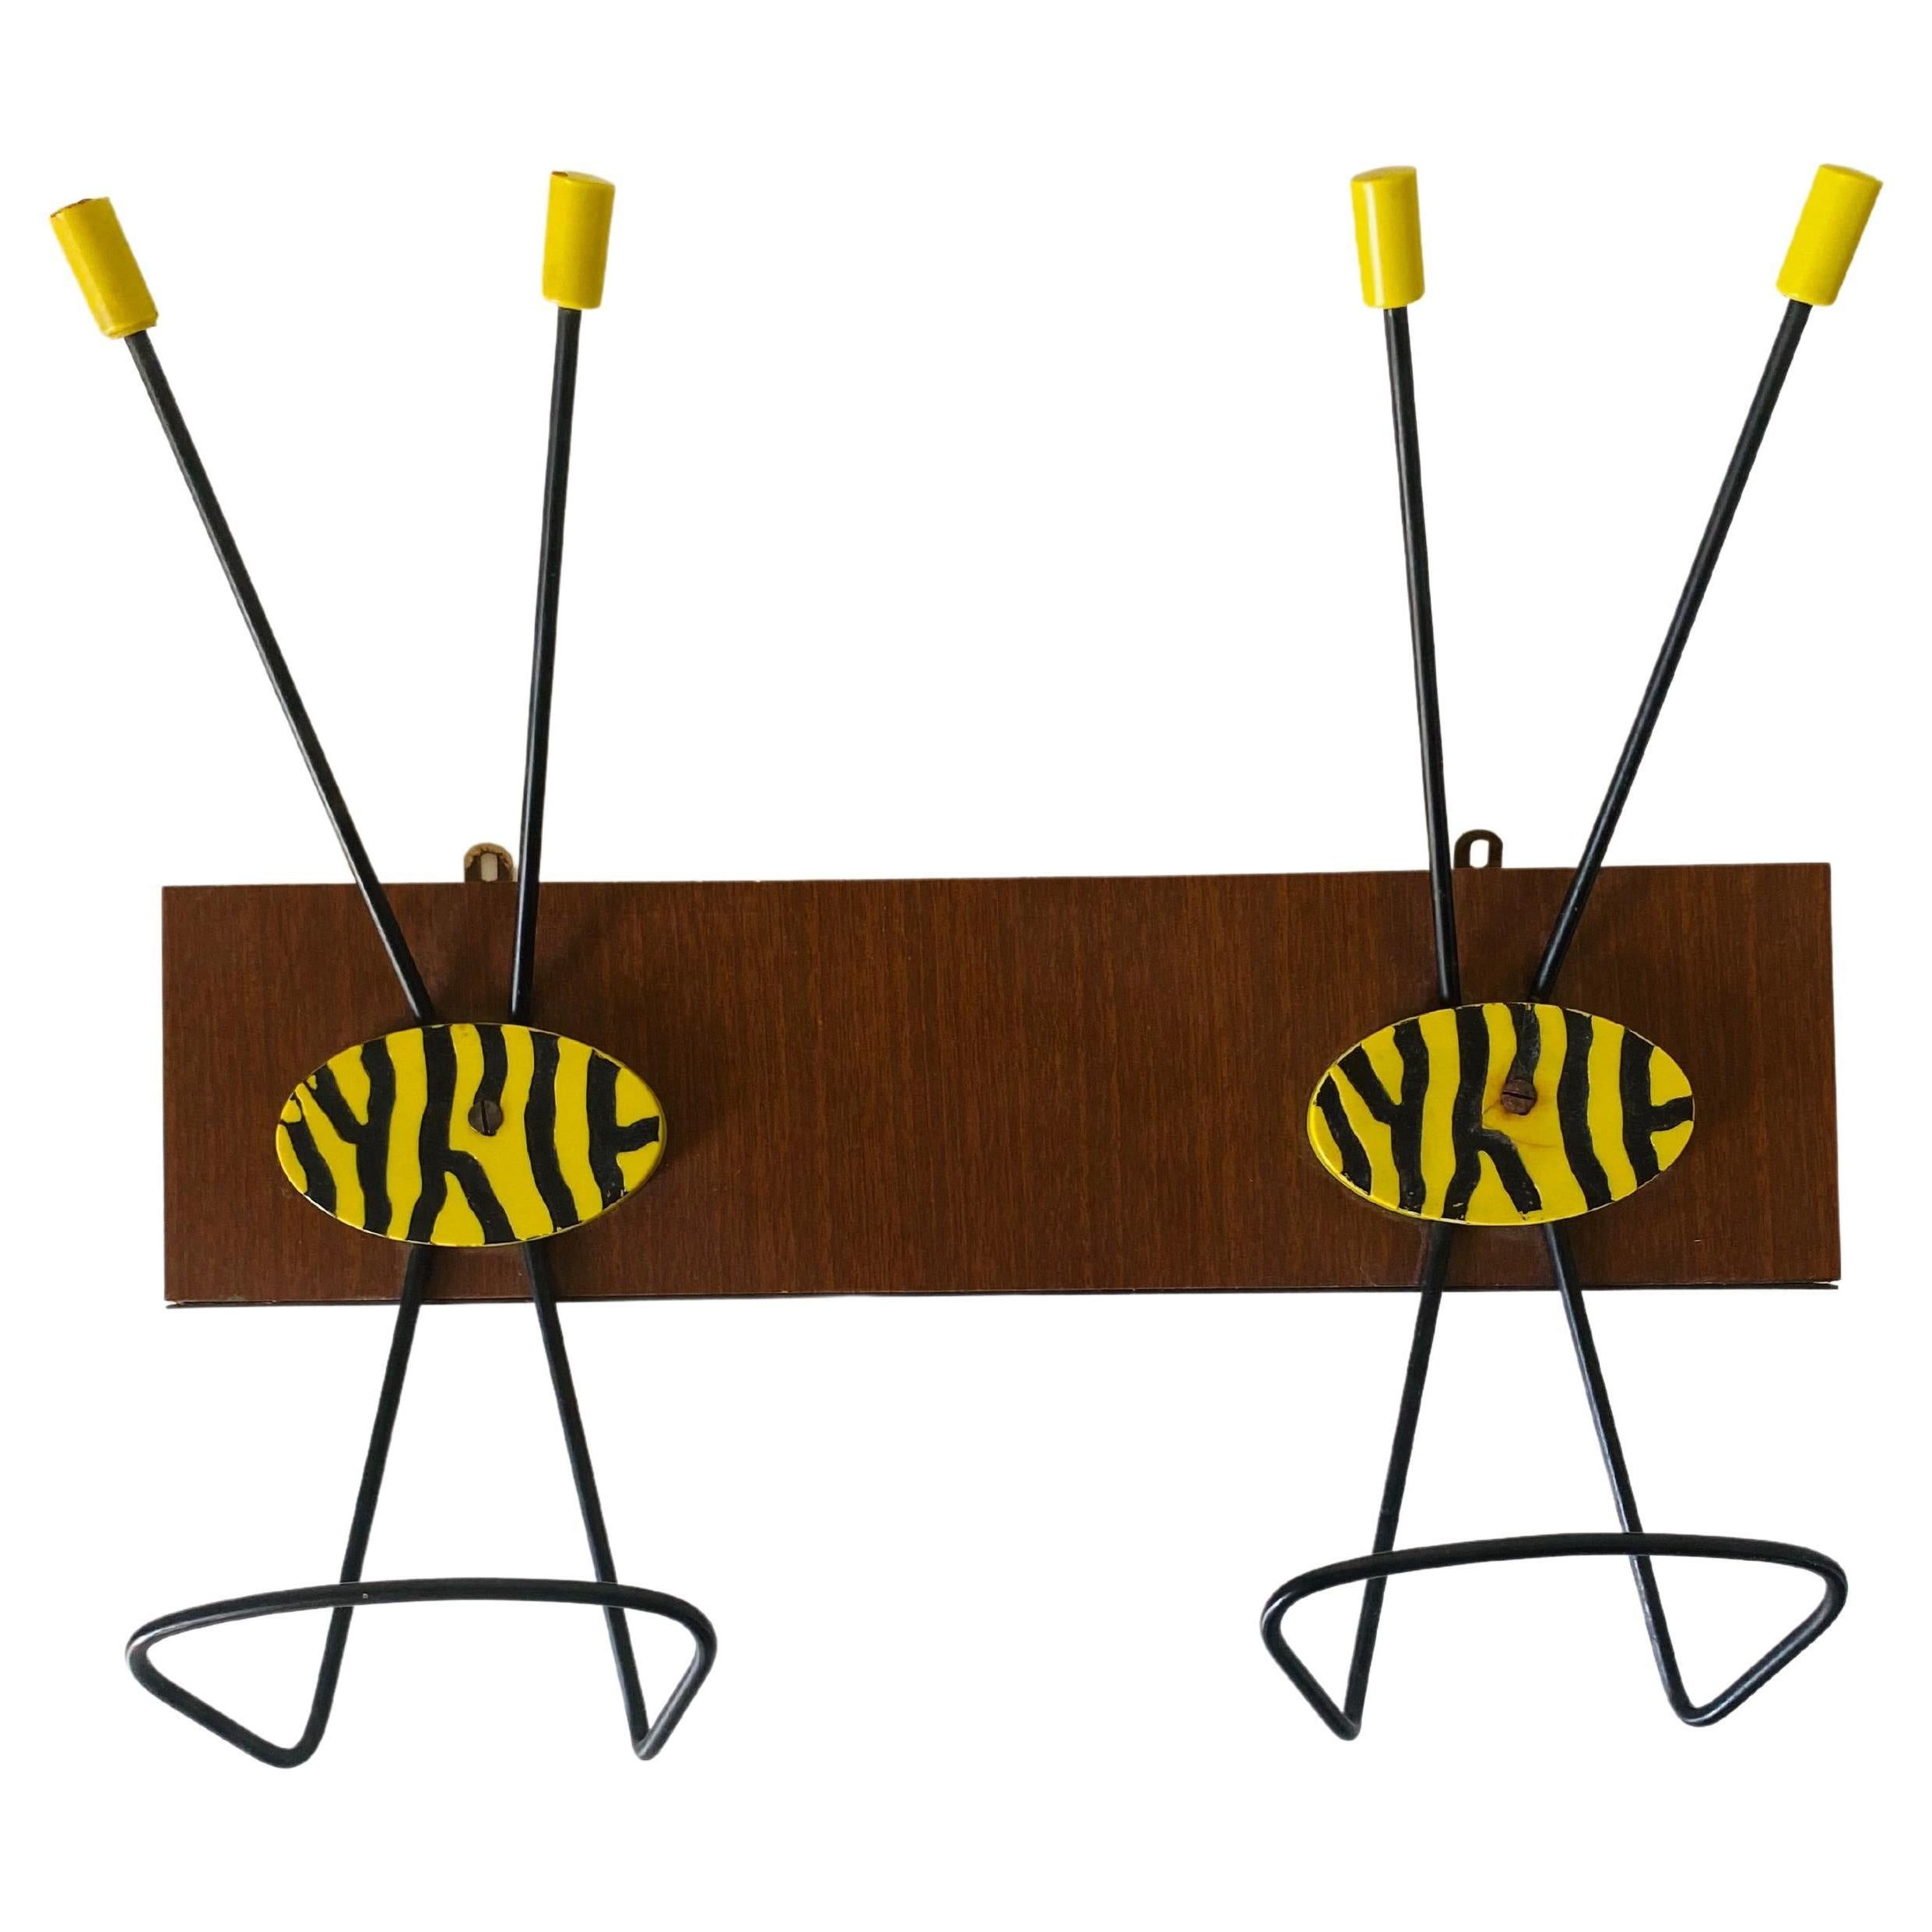 A 1950s vintage coat rack. Teak wood bar with iron rack painted in black and yellow.
In very good conditions with only few signs time.